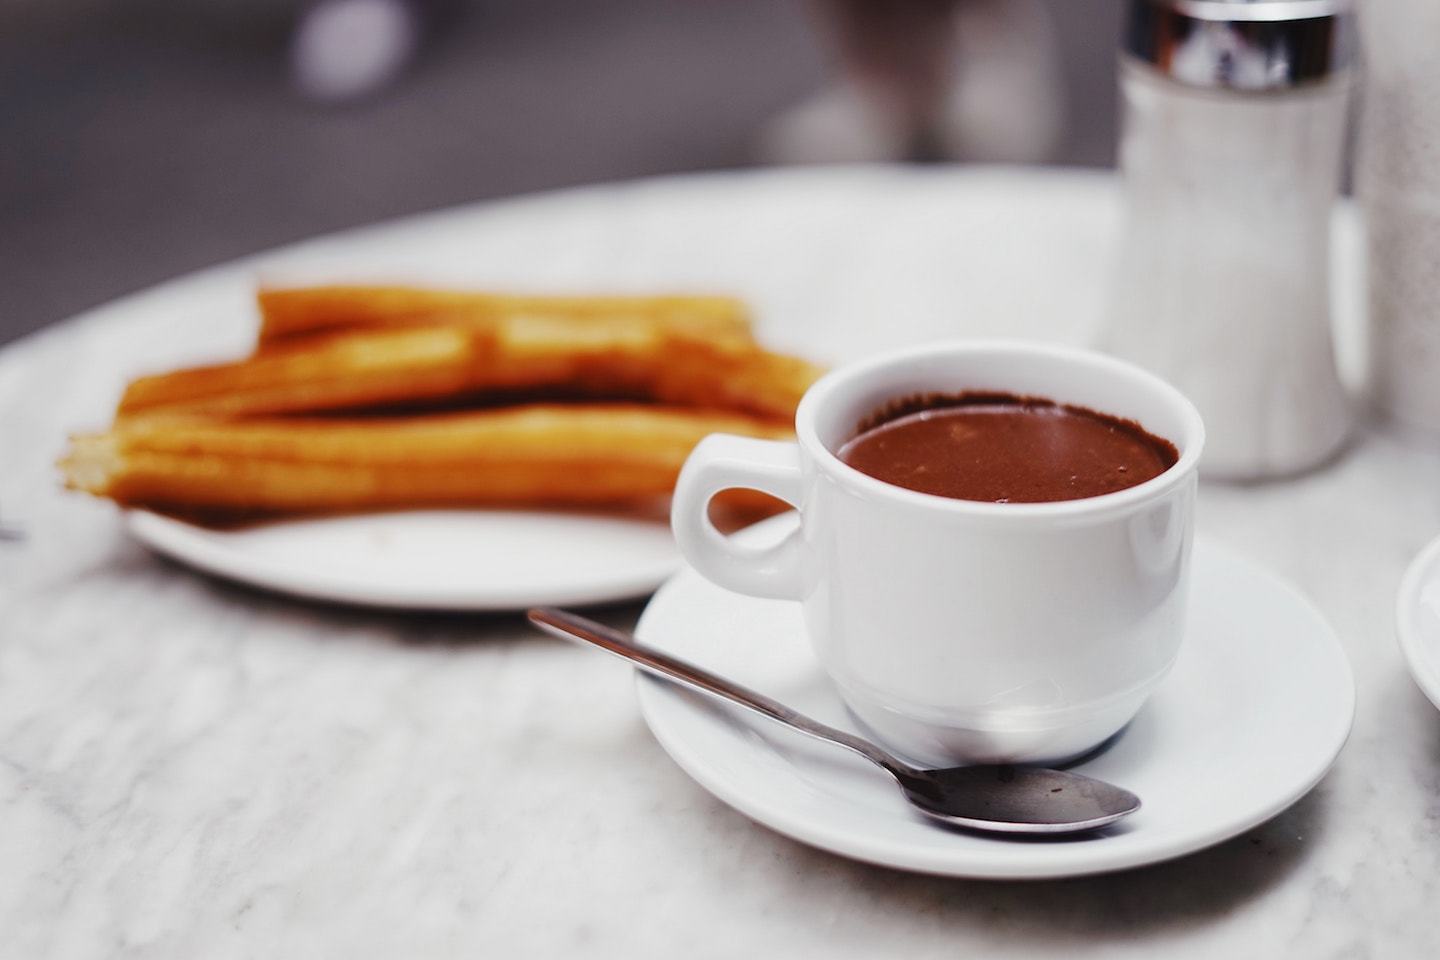 cup of chocolate with churros in the background